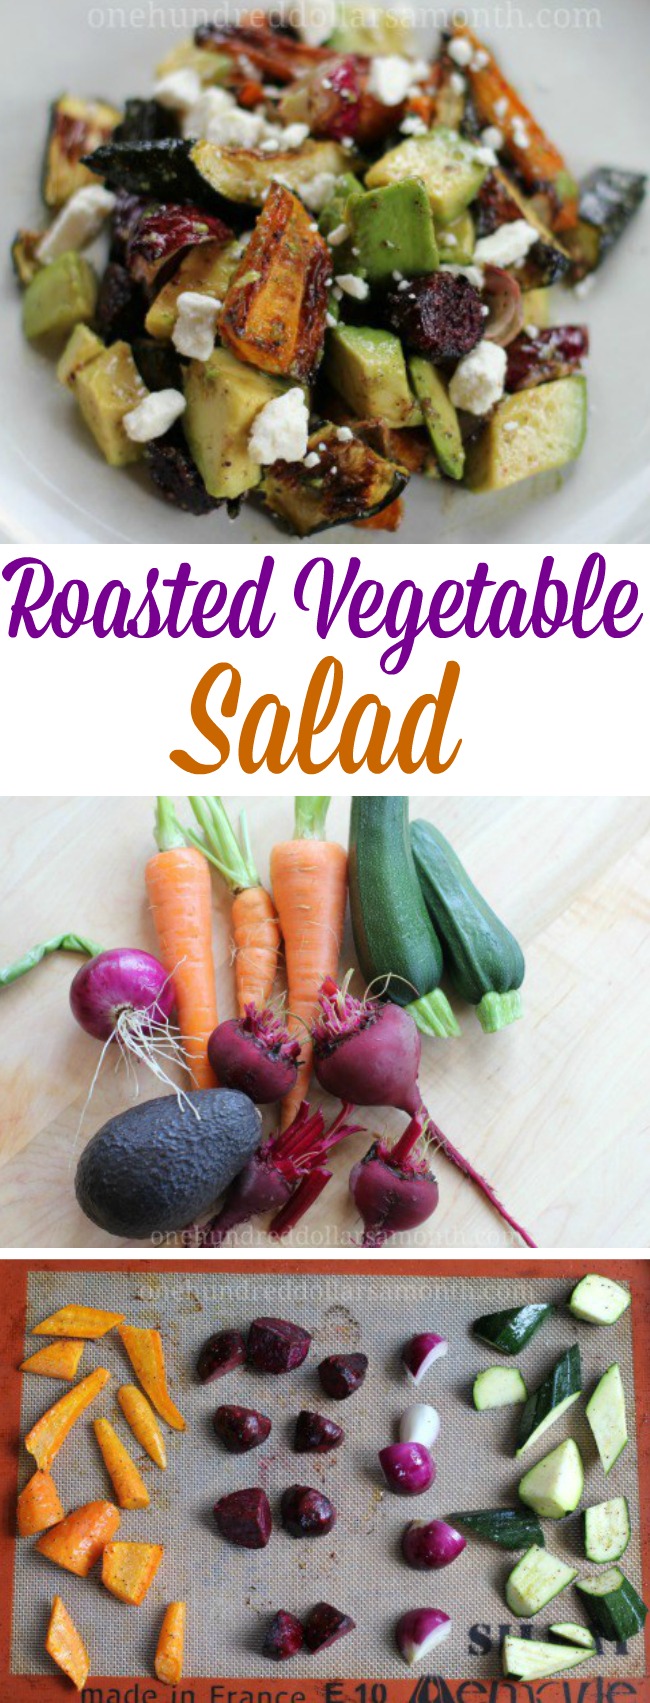 Easy Salad Recipes – Roasted Vegetable Salad with Avocado